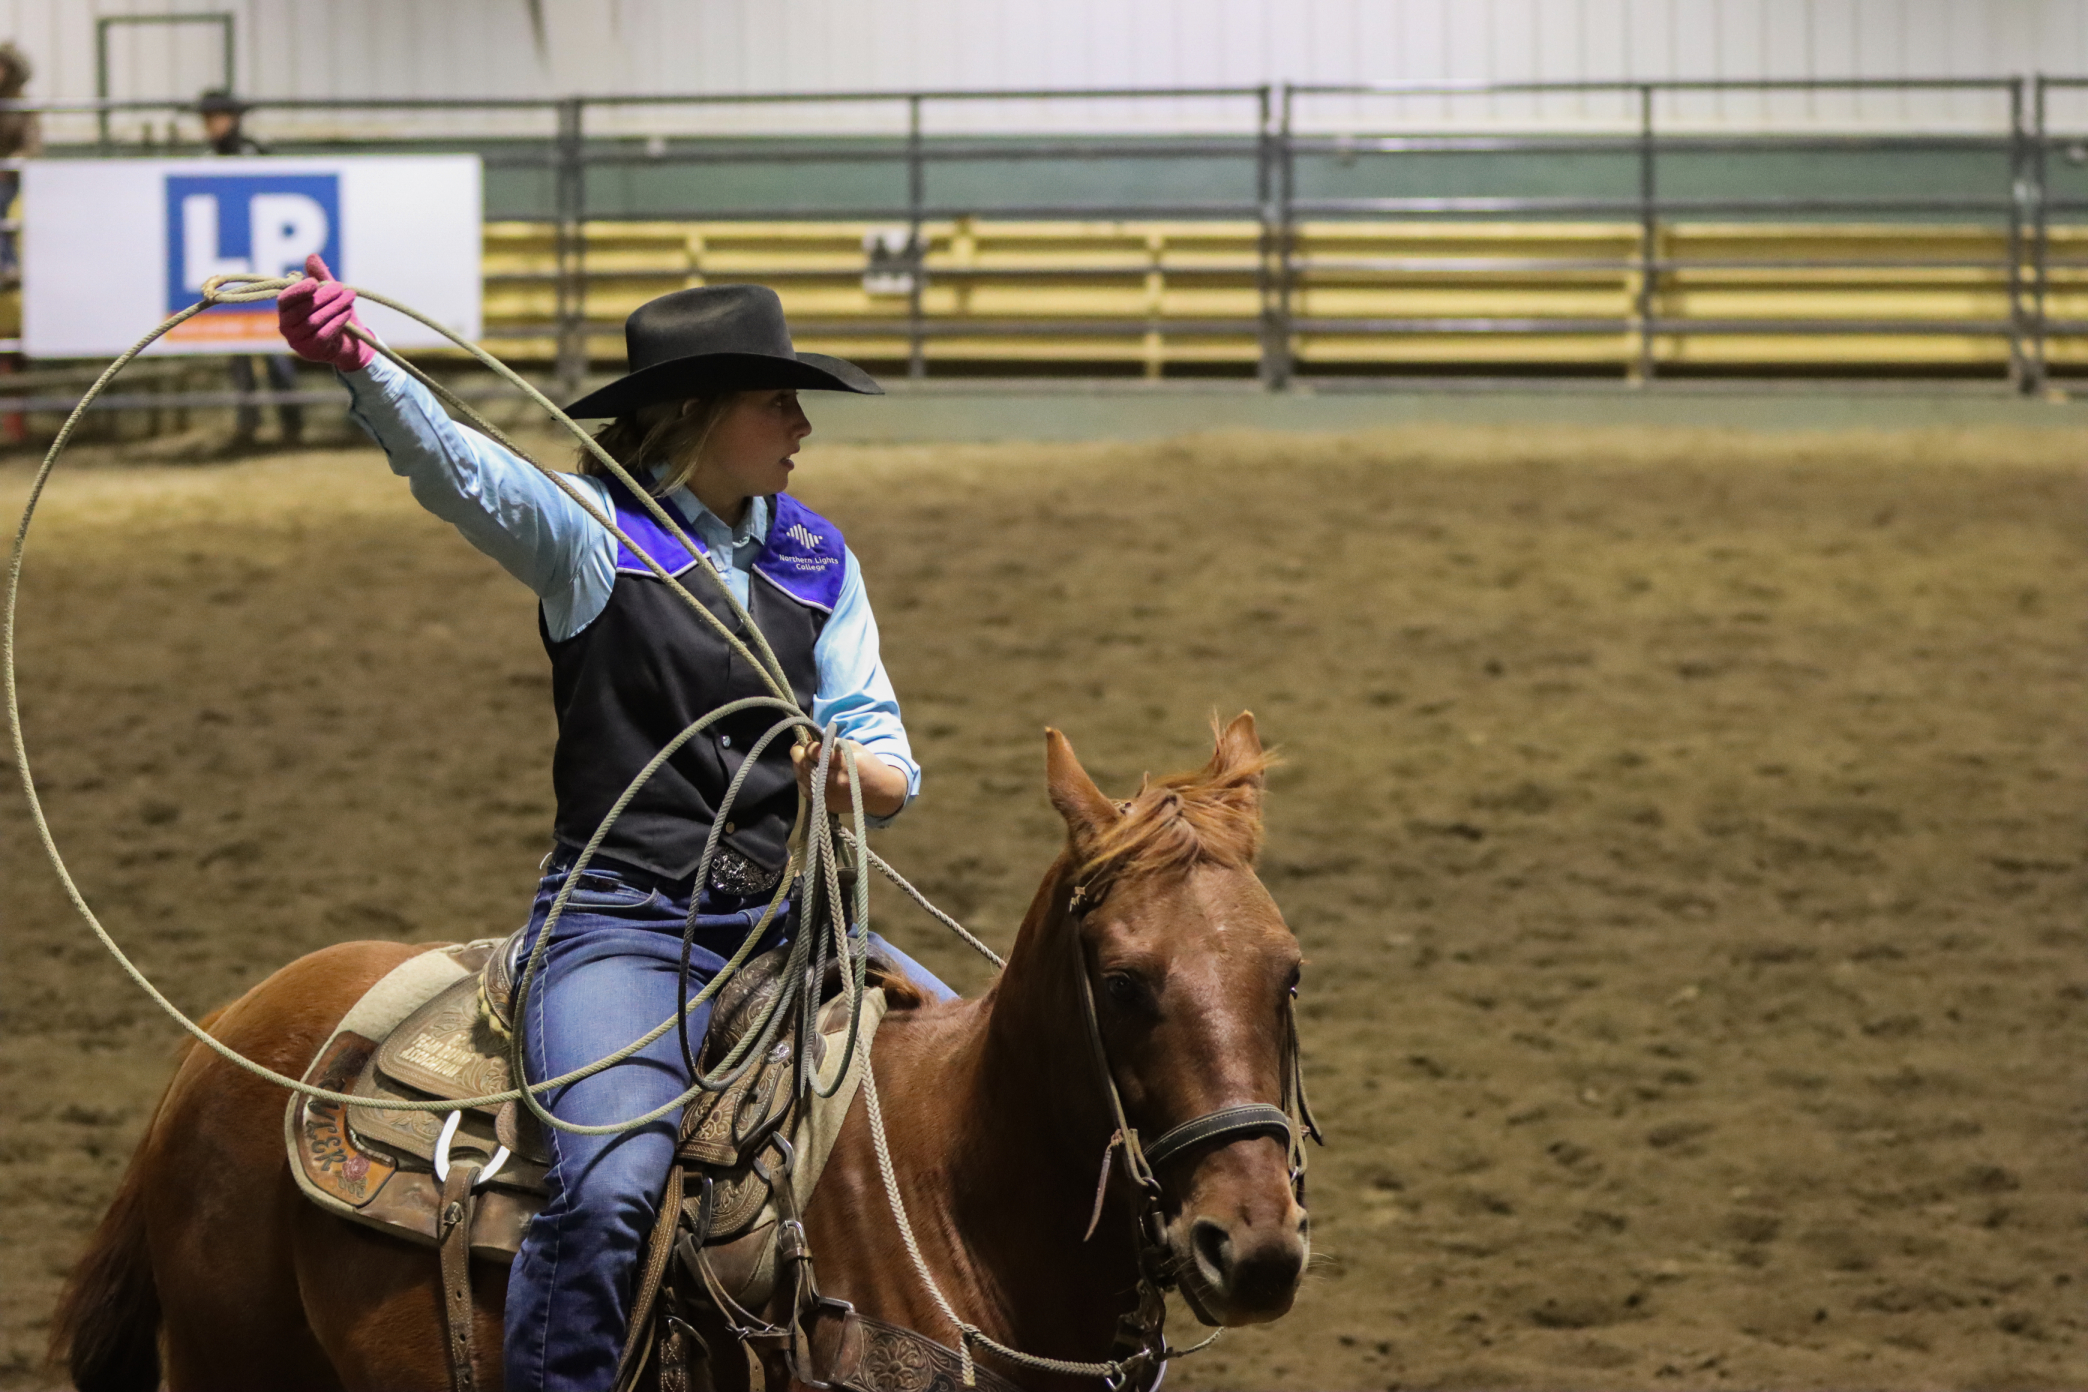 Northern Lights College Rodeo Team member ready to rope.